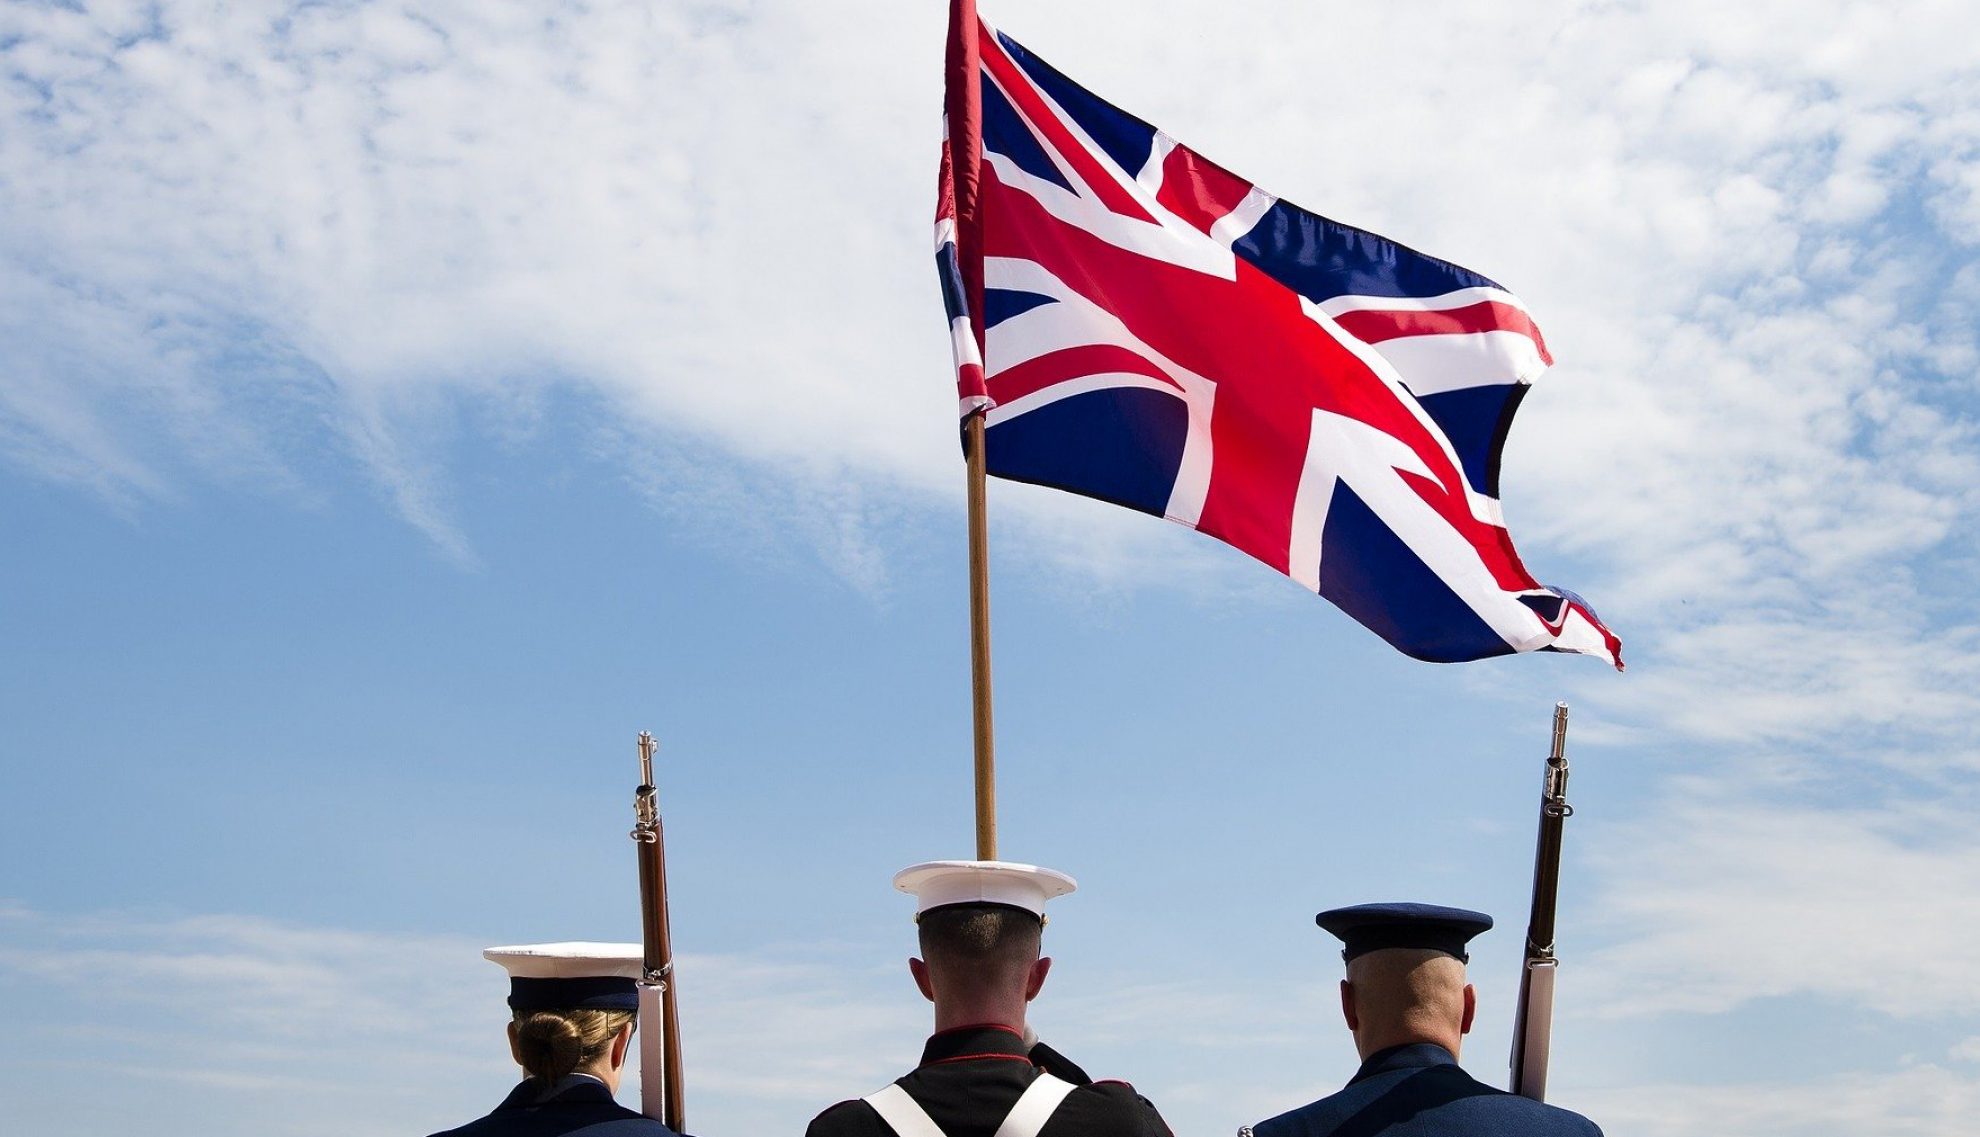 UK armed services personnel with Union Jack flag